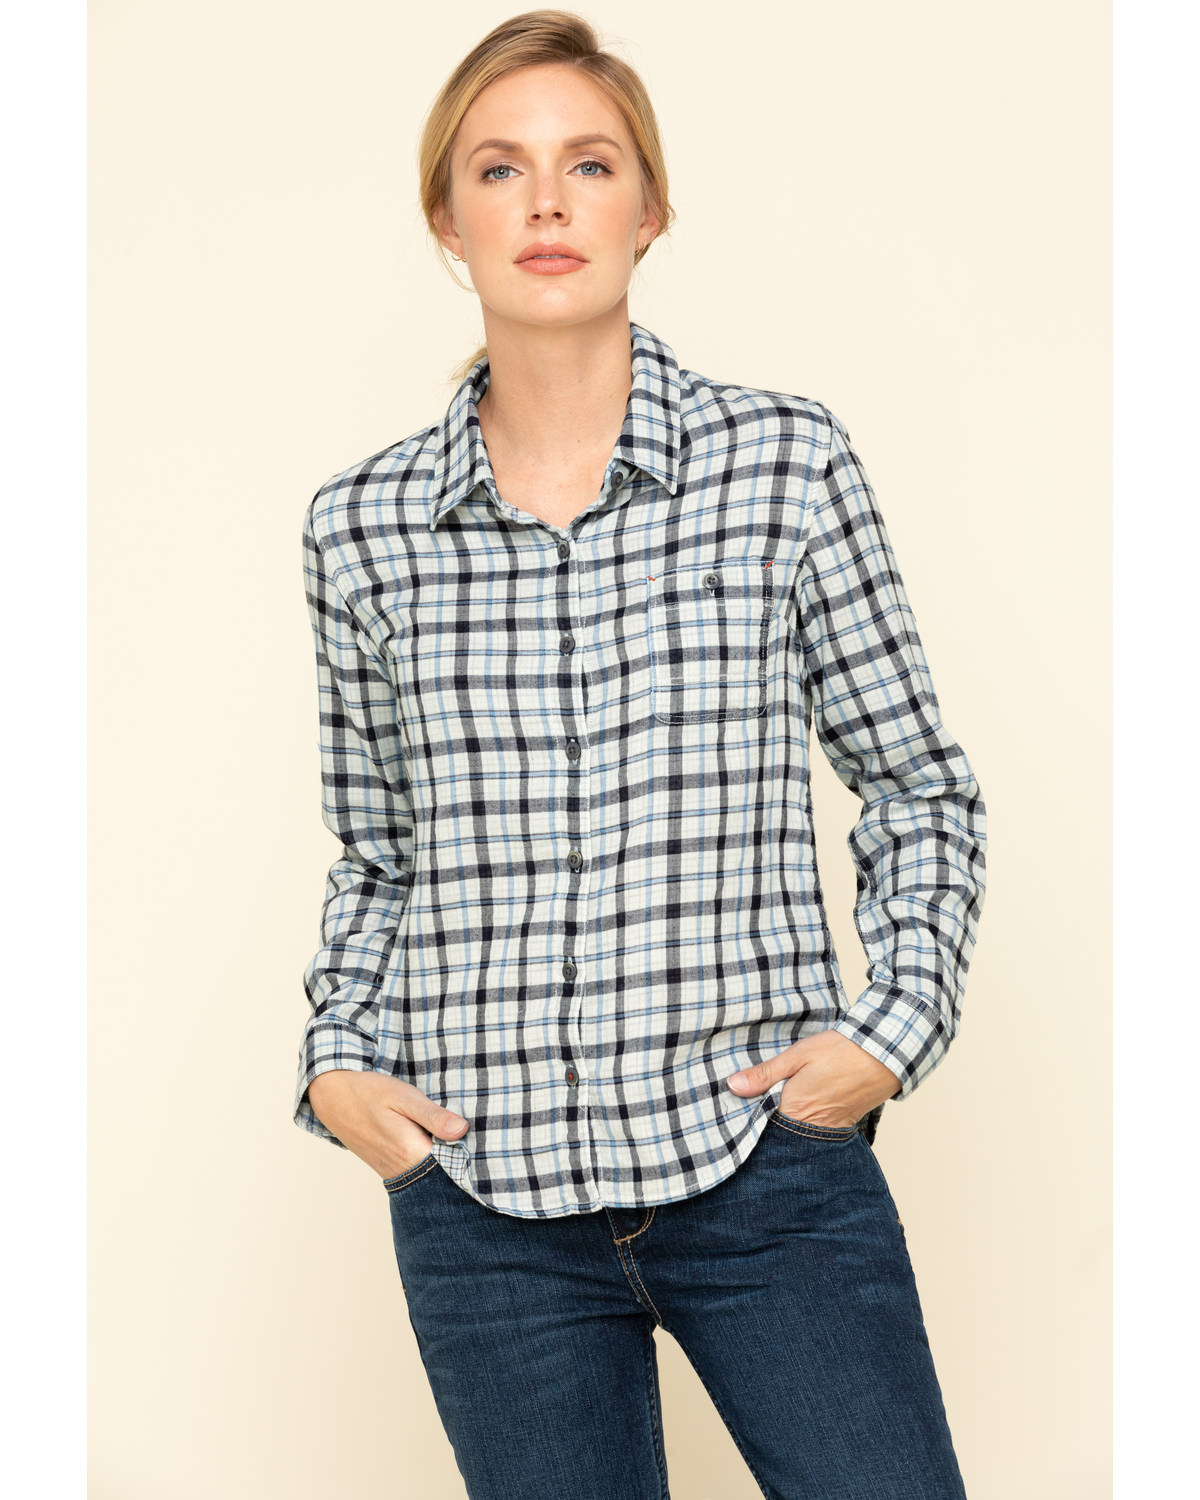 Dovetail Workwear Women's Plaid Print Long Sleeve Button Down Givens Work Shirt